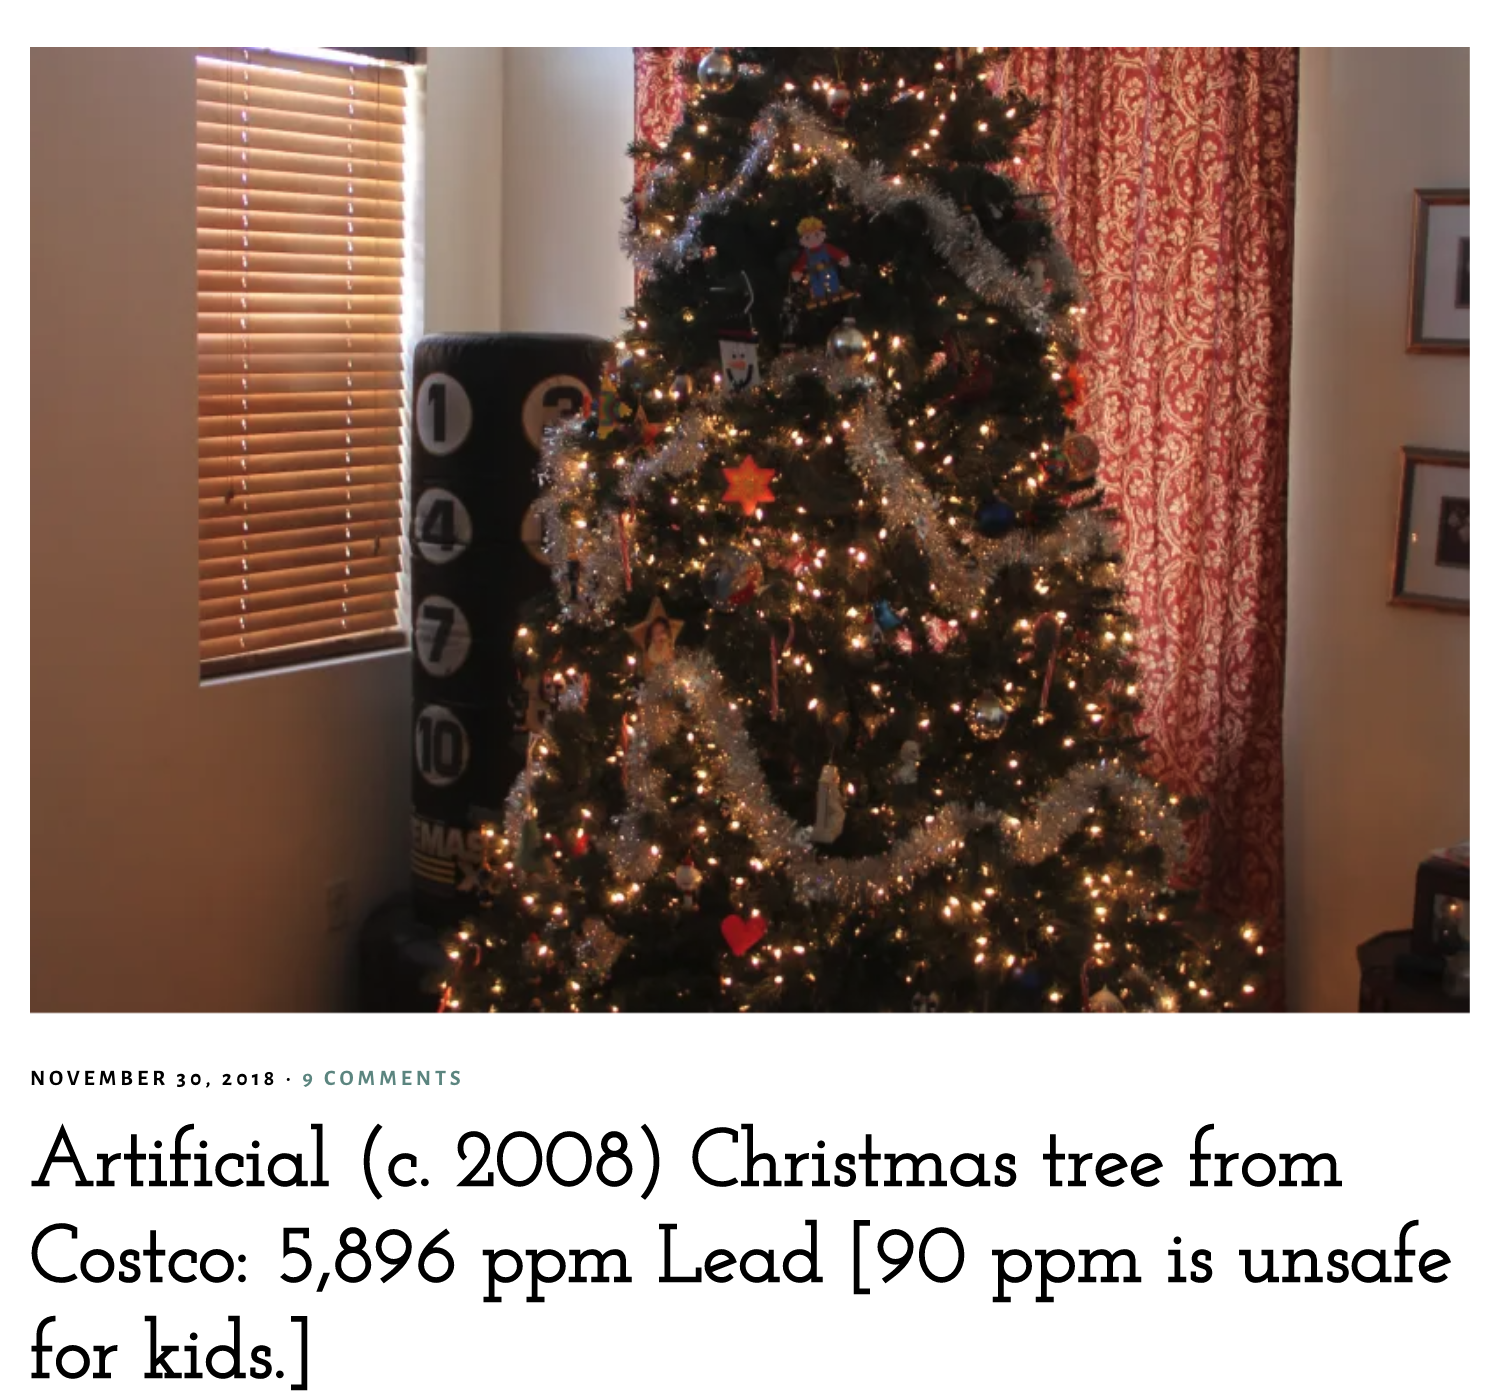 Costco tree with highest lead level tested